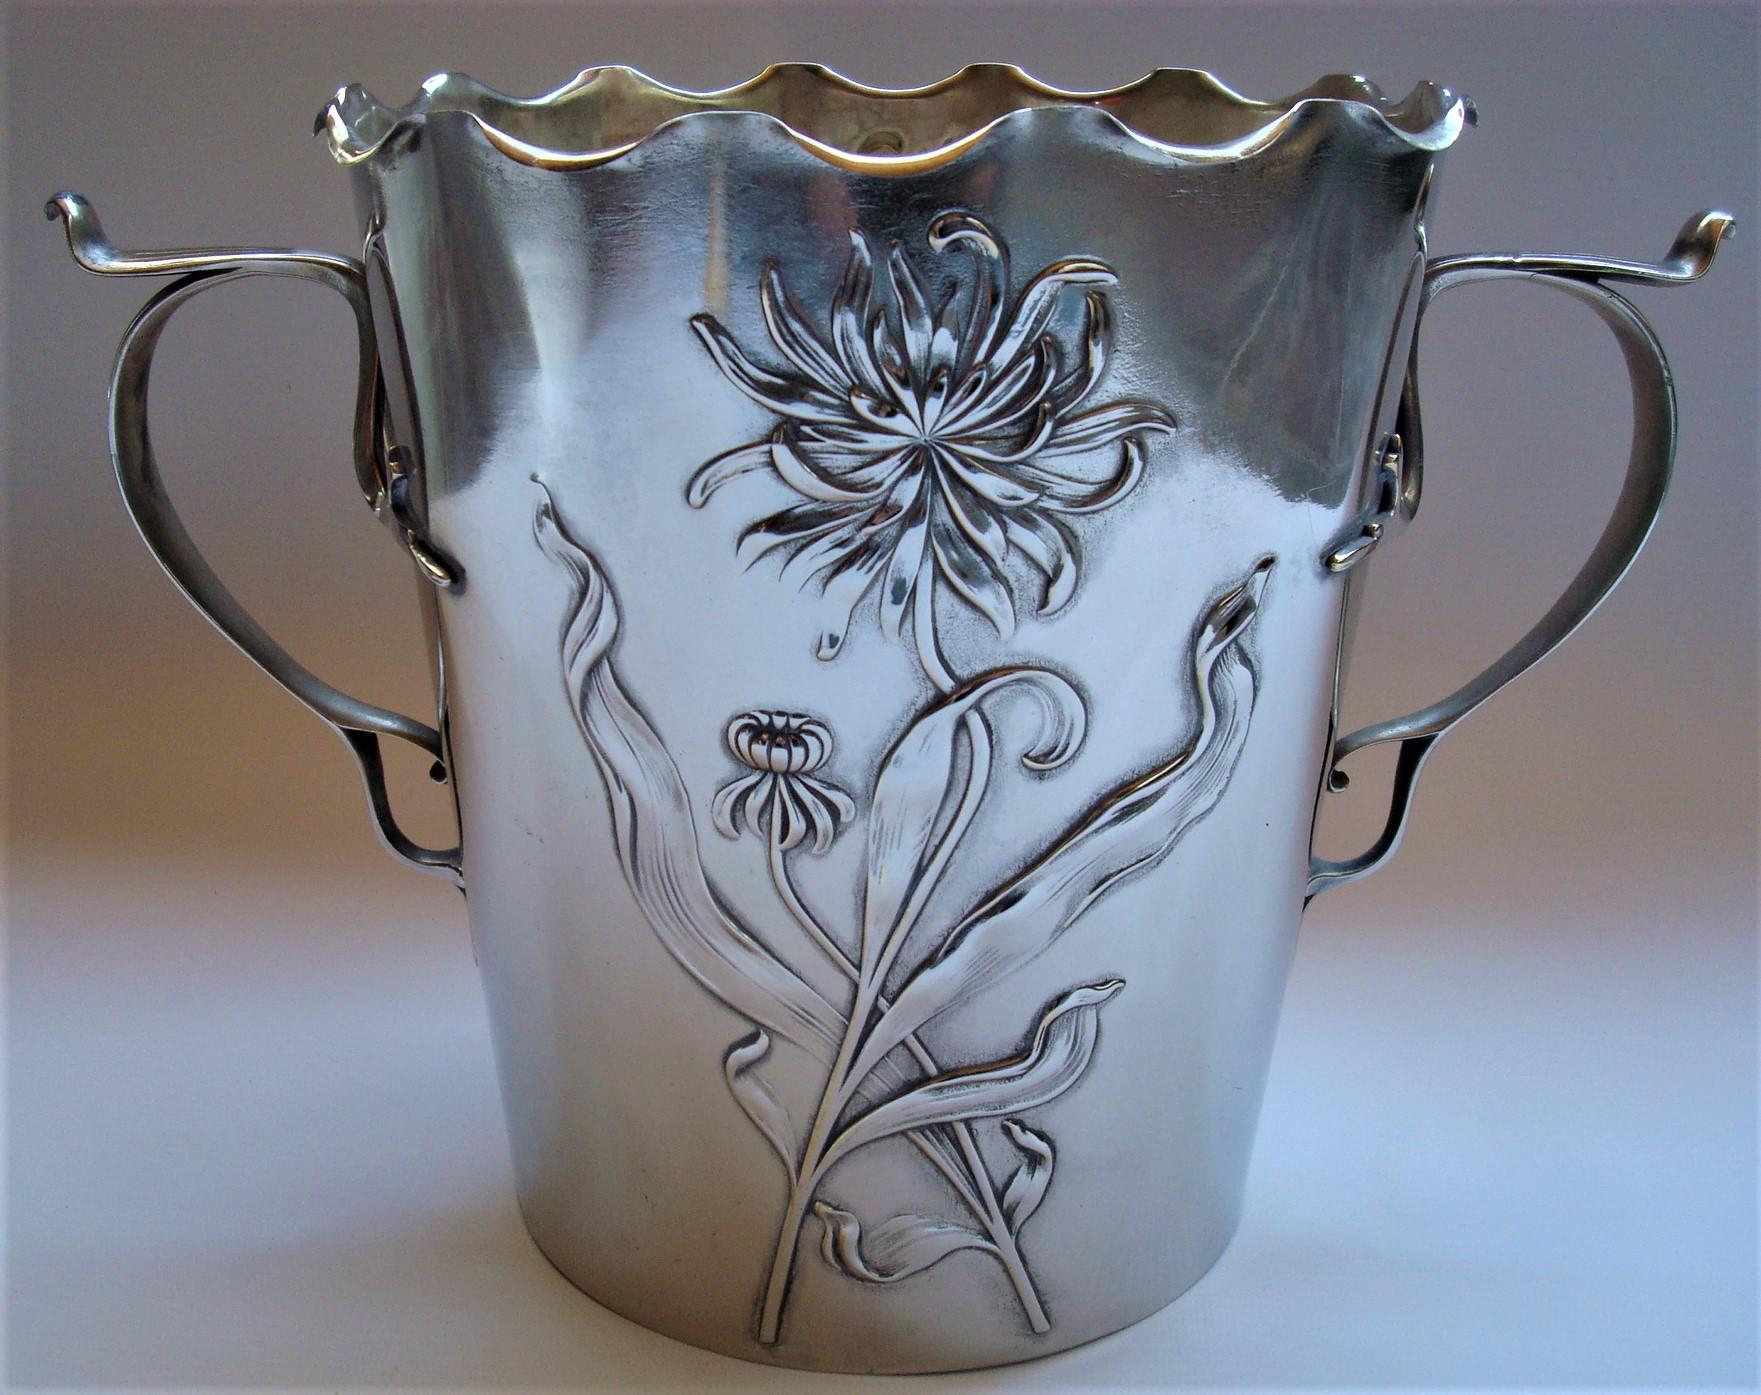 Art Nouveau Flowers Champagne / Wine bucket cooler. 1900´s.
Flowers design. Very Nice and unique cooler.